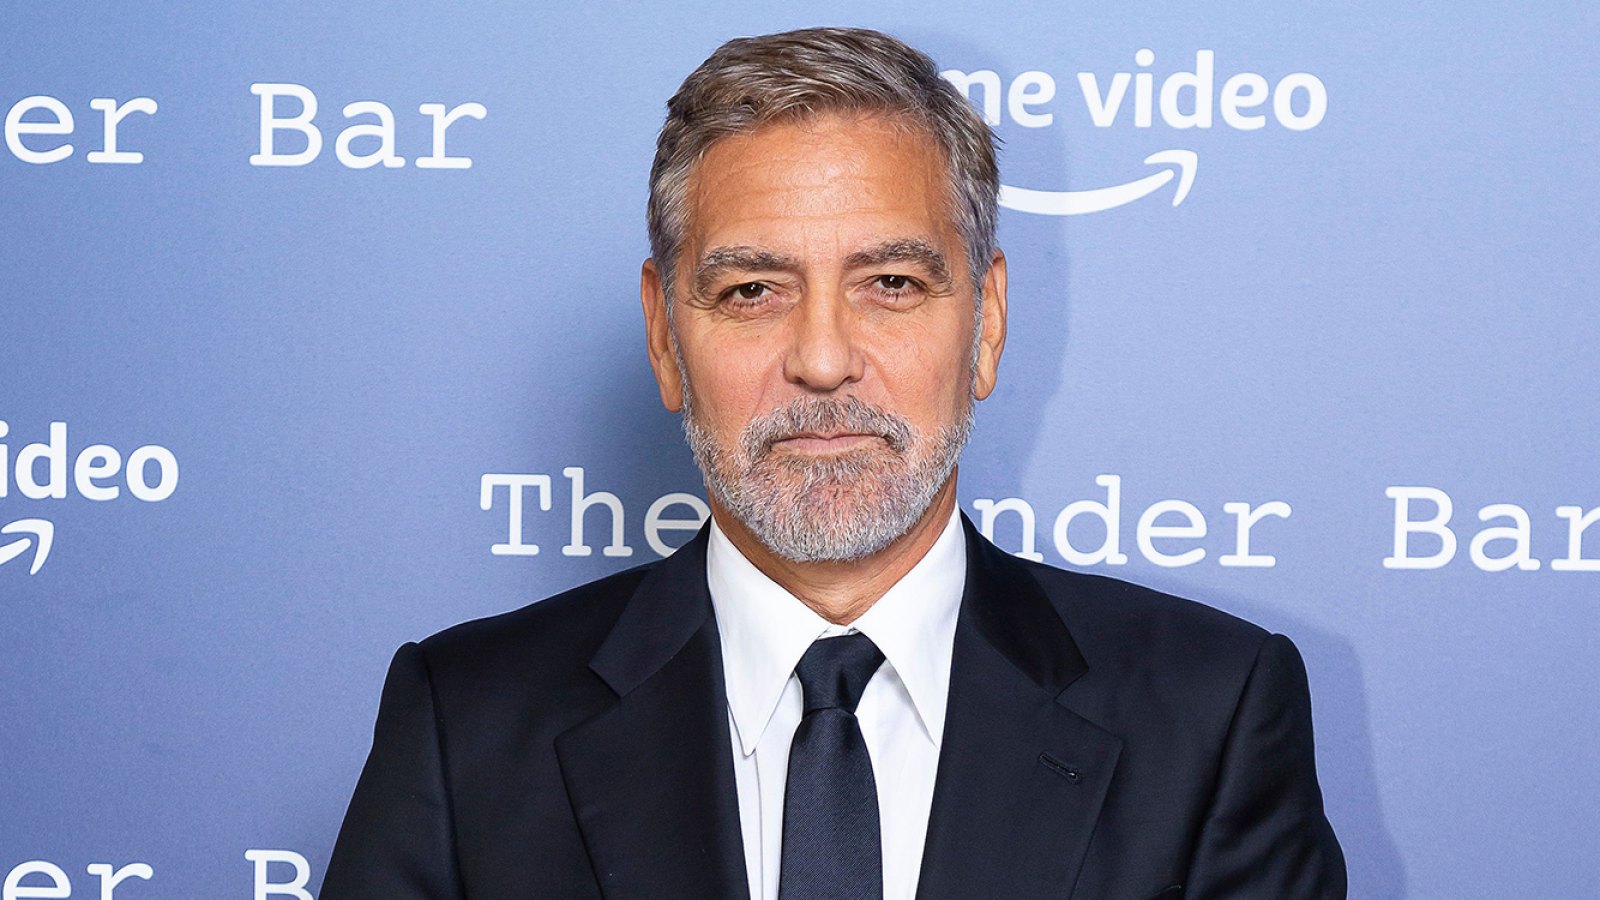 George Clooney Can't Do More Superhero Movies Because He 'F—ked It Up So Bad' With 'Batman & Robin